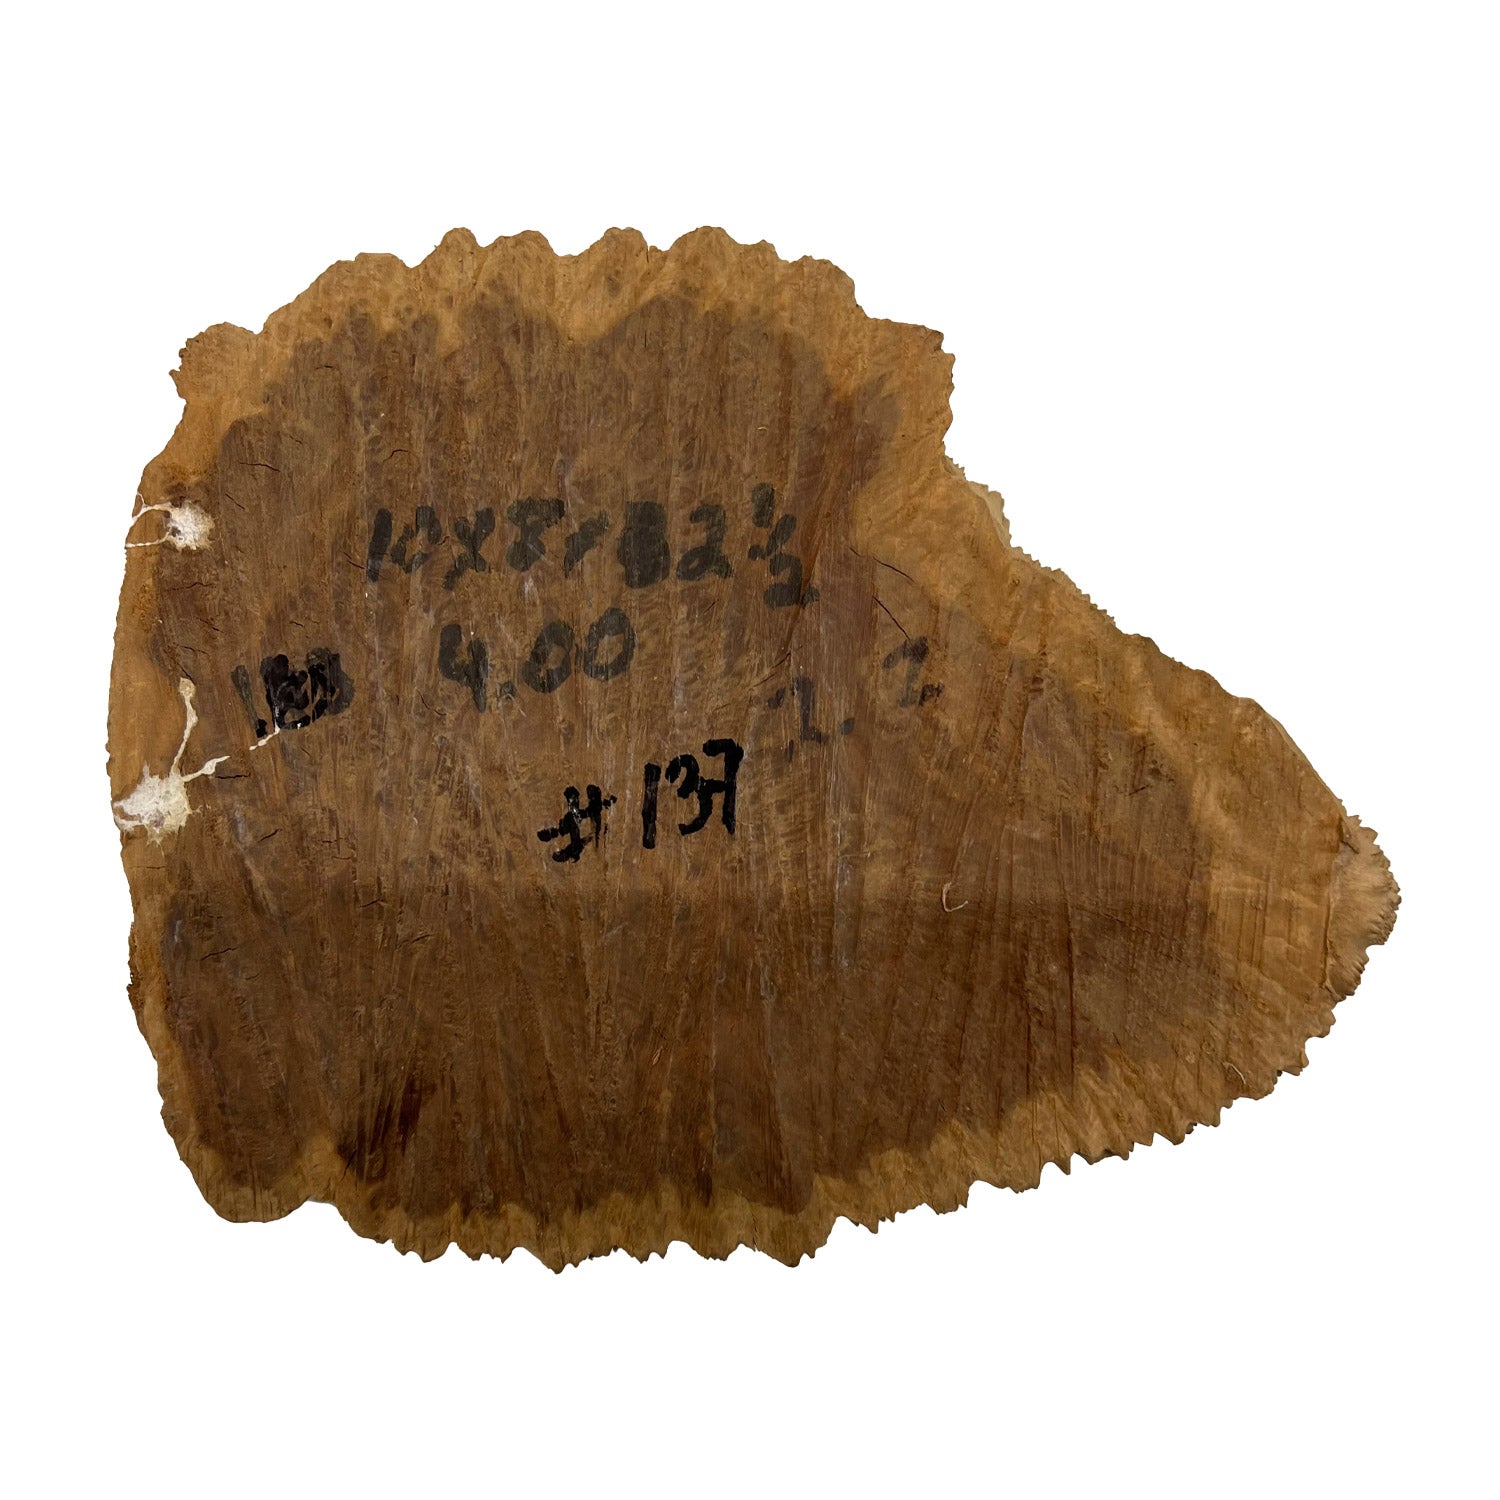 Red Mallee Burl | 10&quot; x 8&quot; x 2-1/2&quot; | 4 lbs - 